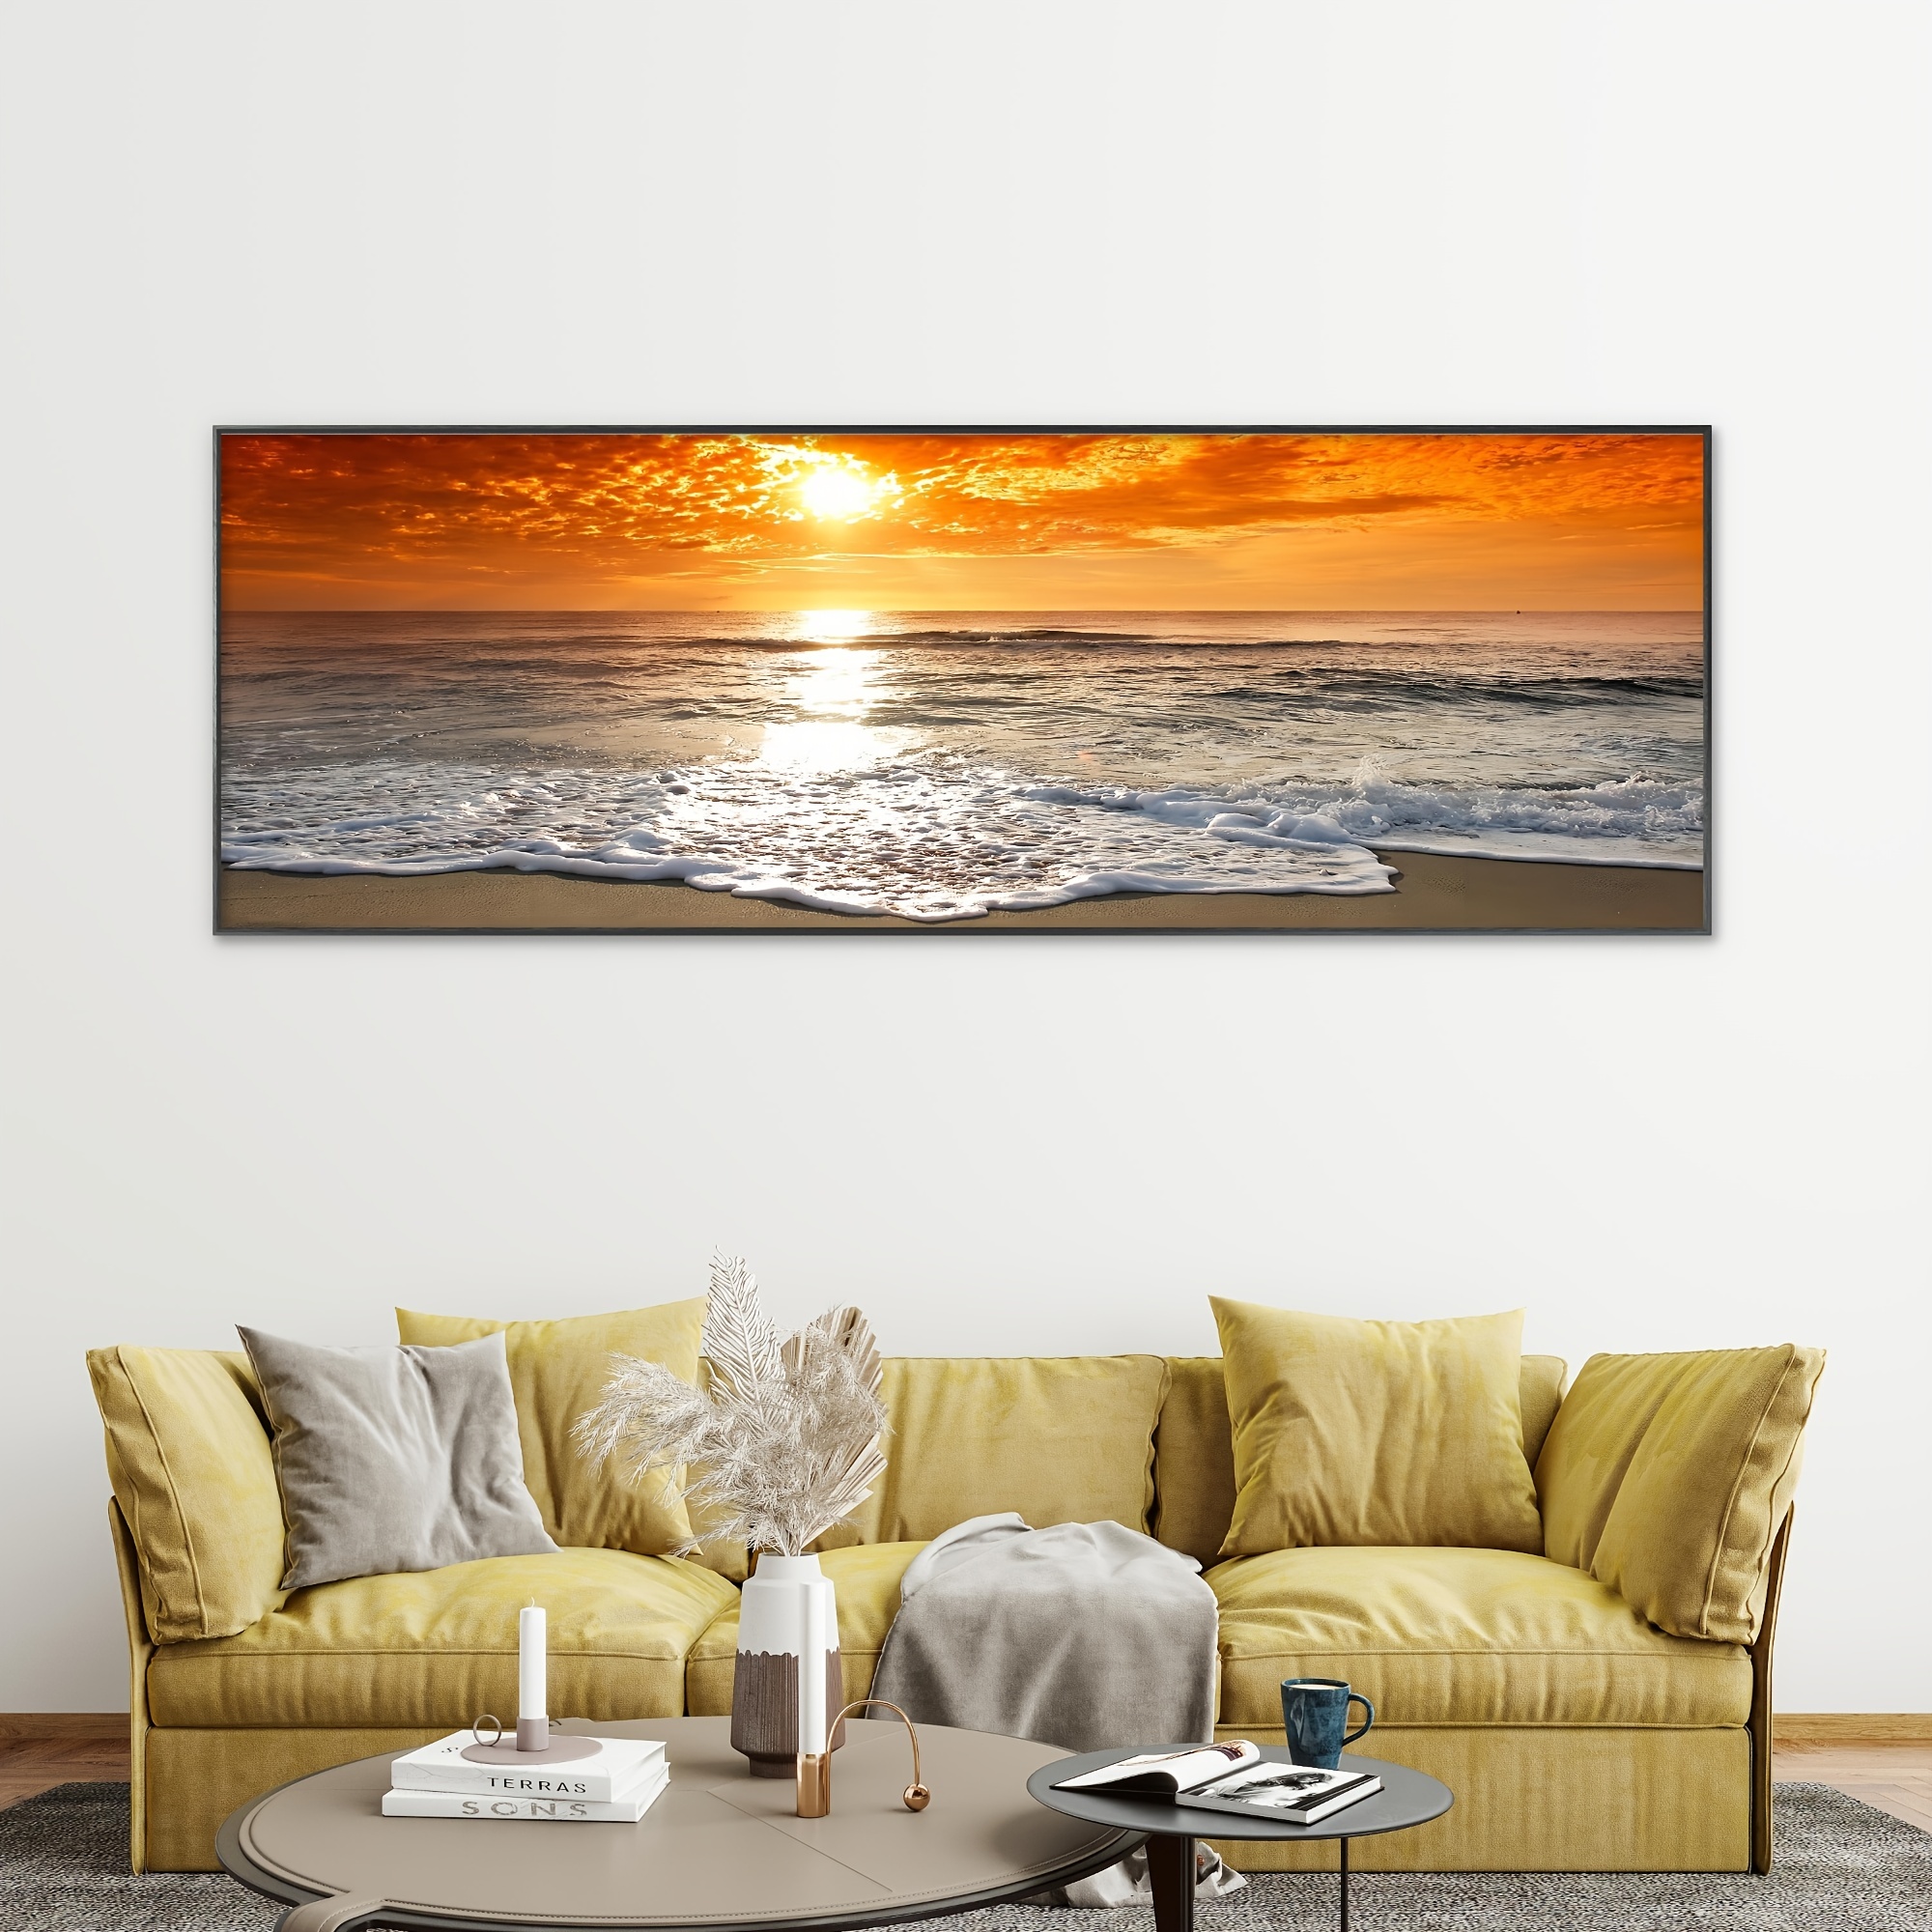 

1pc [no Frame]scandinavian Sunset Landscape Canvas Print For Living Room Wall Art - Natural Sea Beach Panorama Poster And Prints - (no Frame)